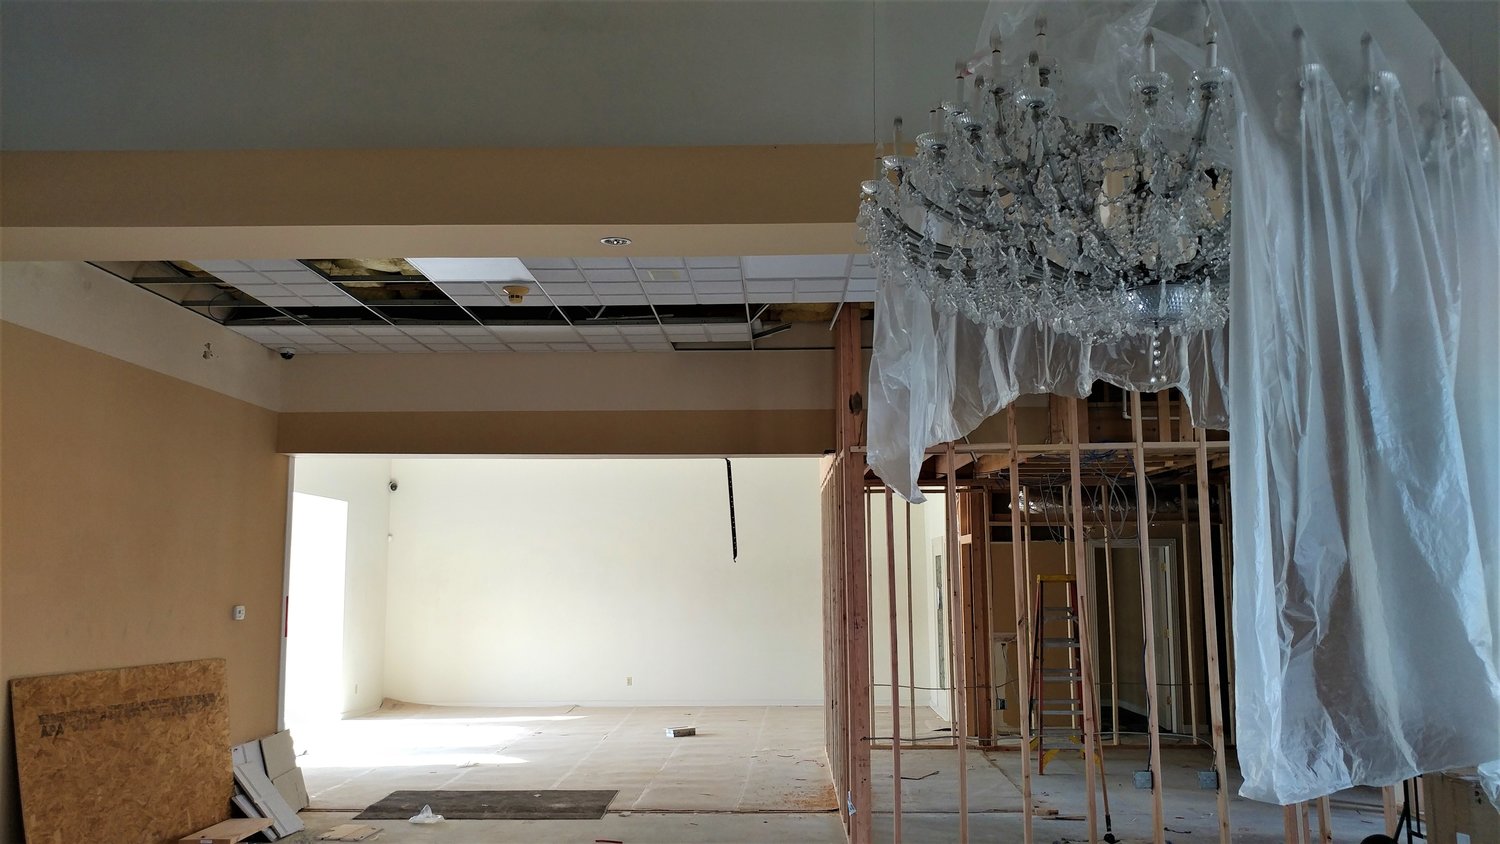 The interior of the Cutter Gallery property as it looked on Dec. 8, as renovation work continued.